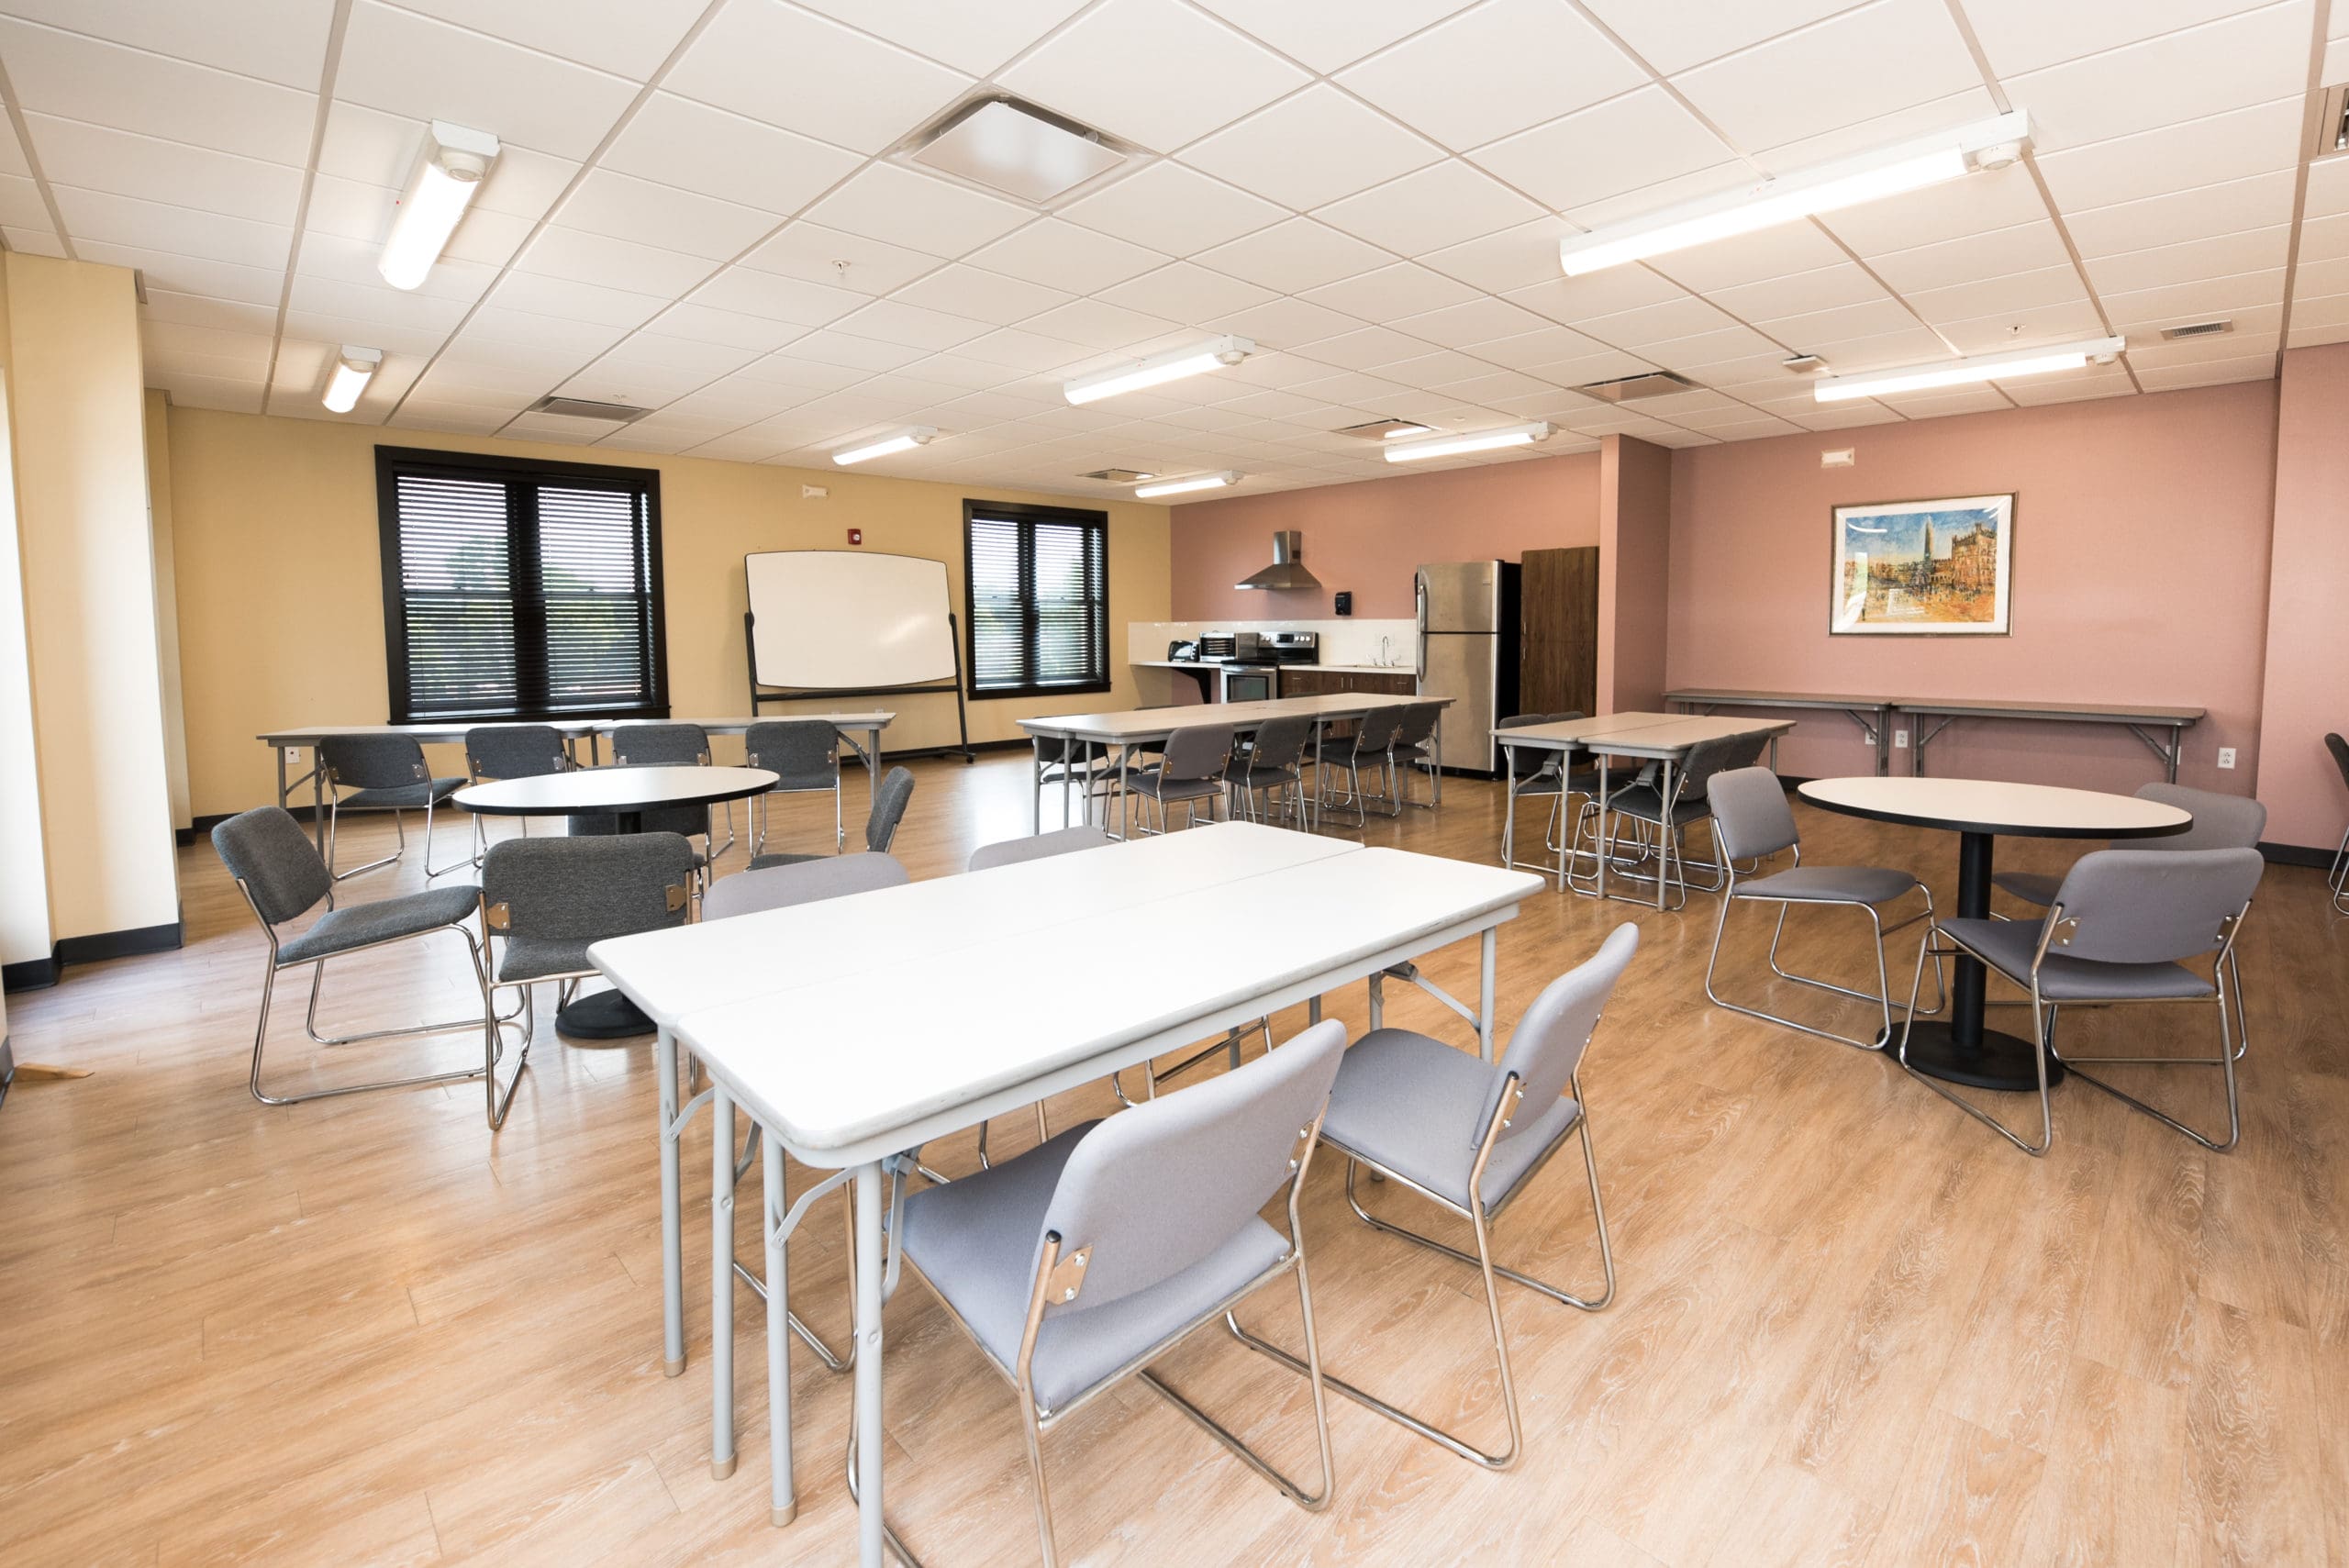 Link to Small Meeting Spaces available through the Siena Hall Conference Center.